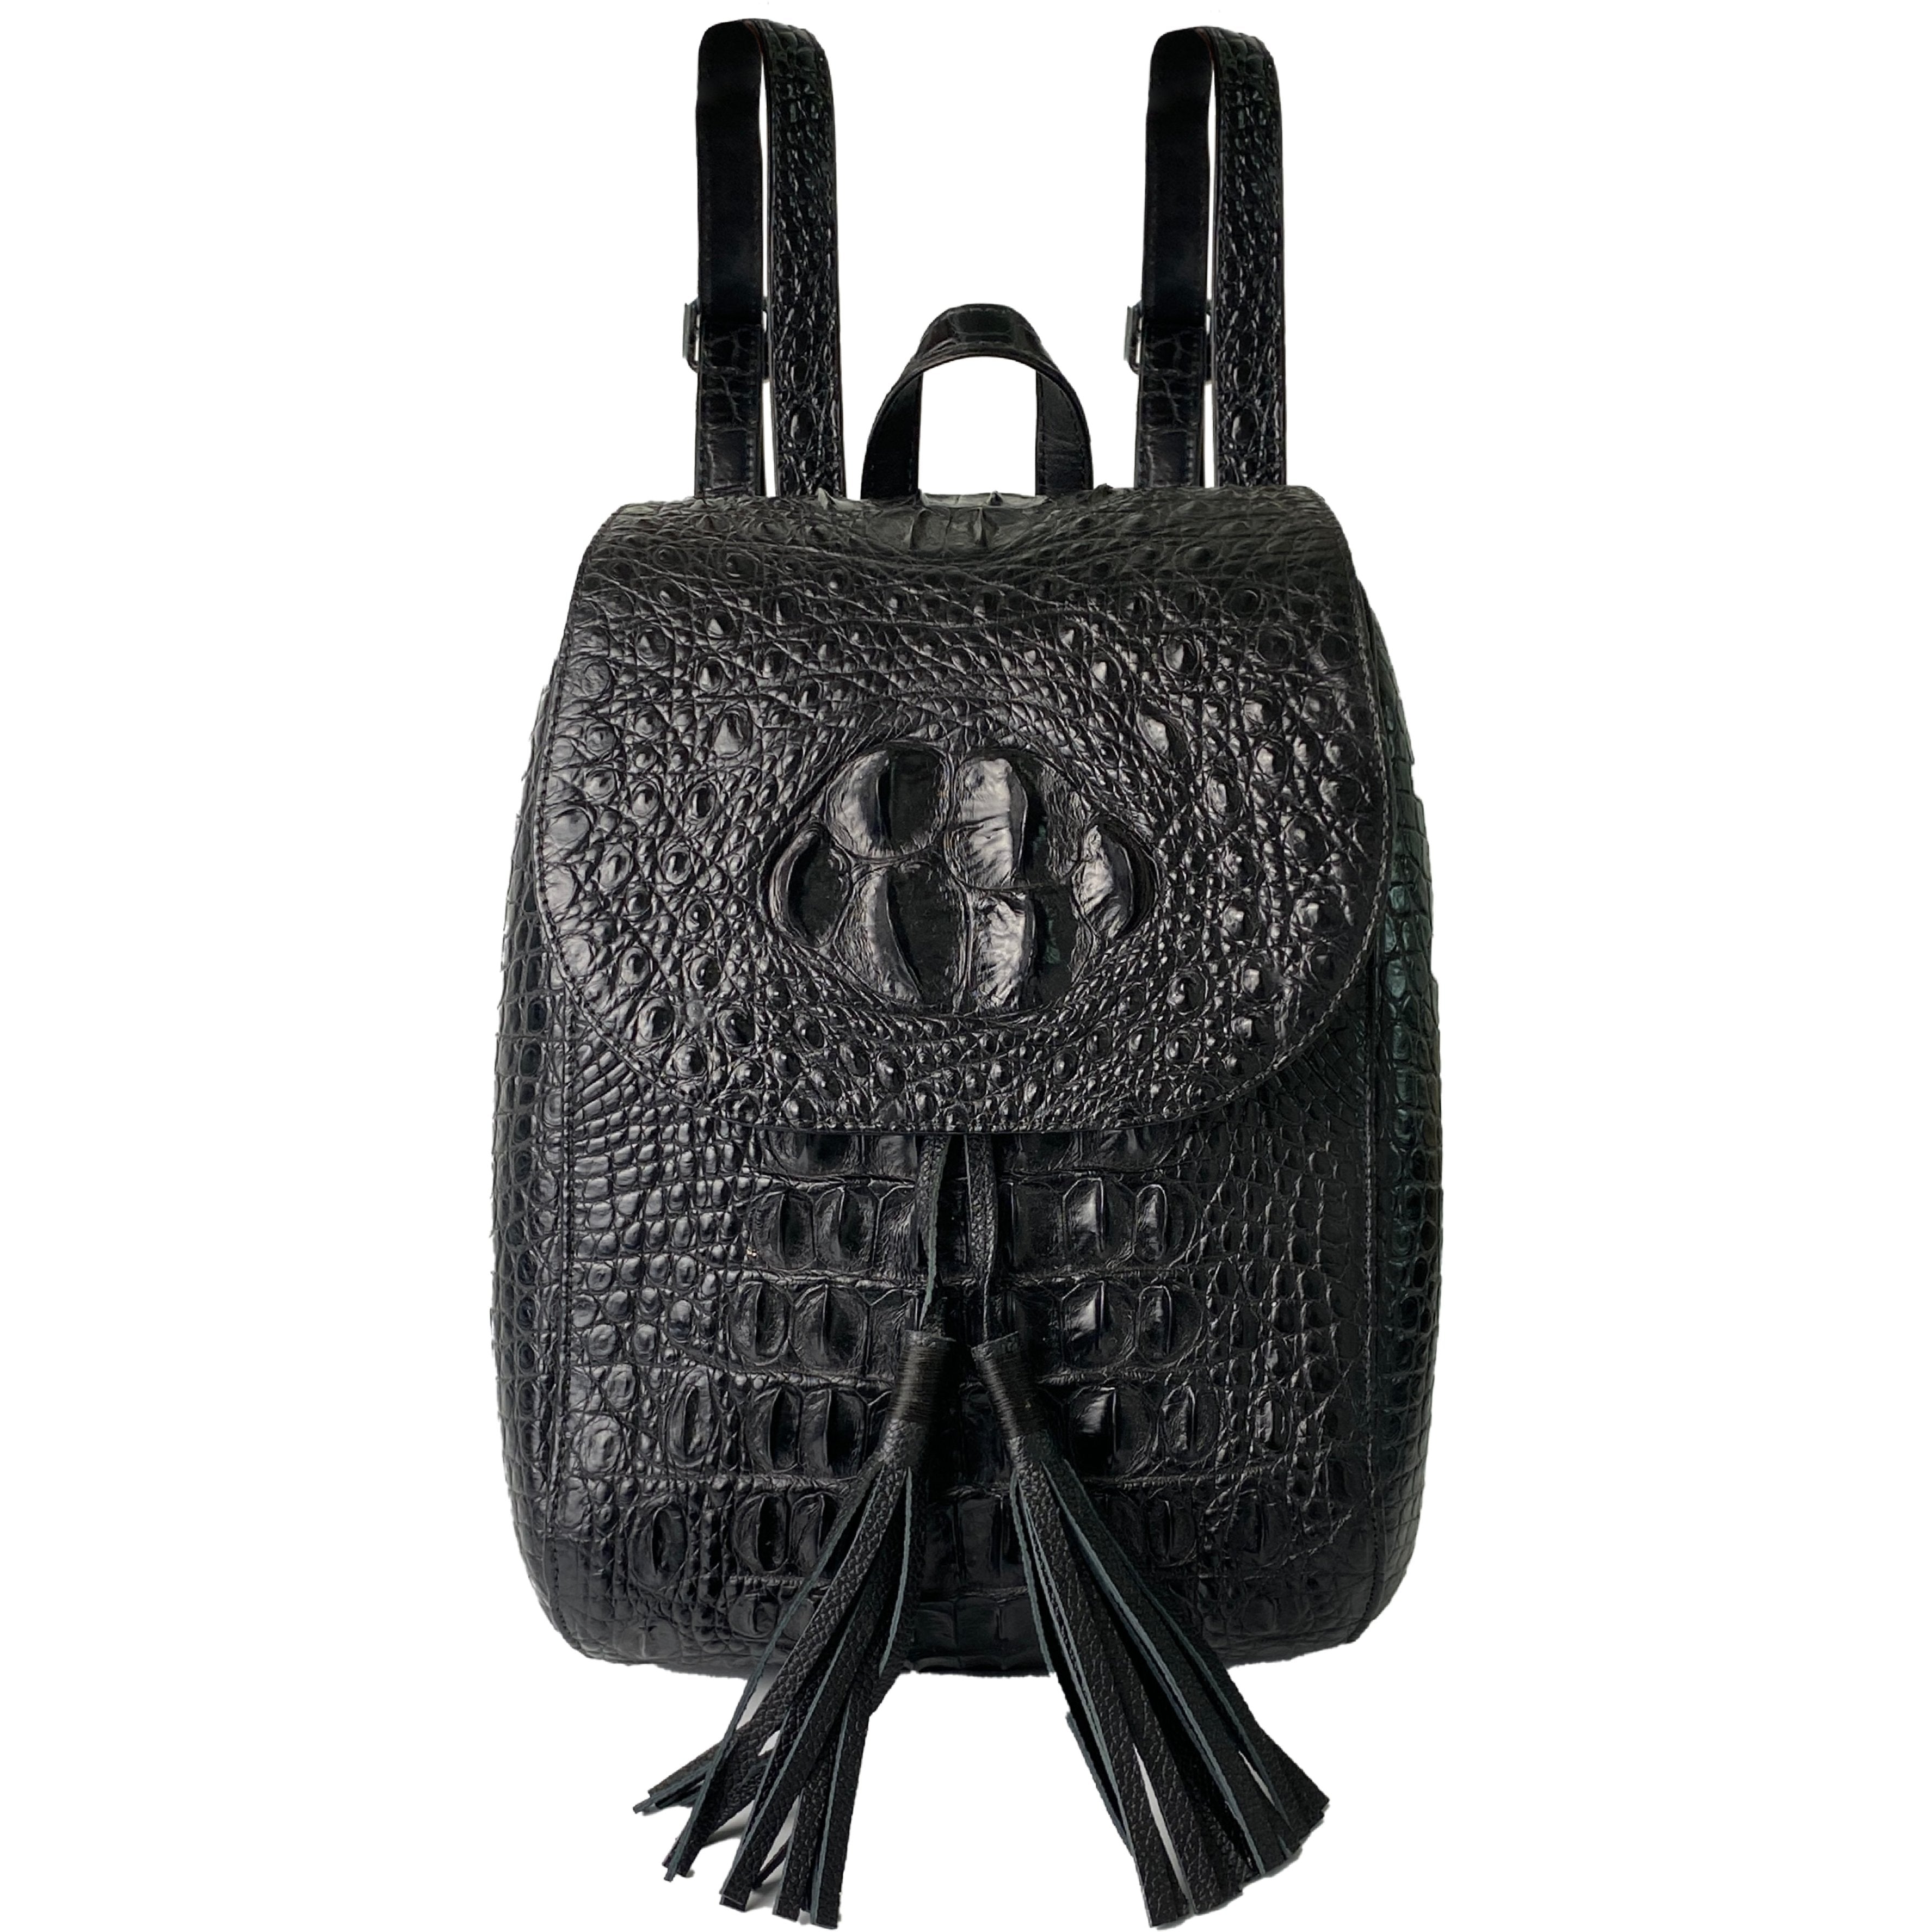 unique backpack made by hand out of natural leather made by Ladybuq  distressed leather vintage style travel bag